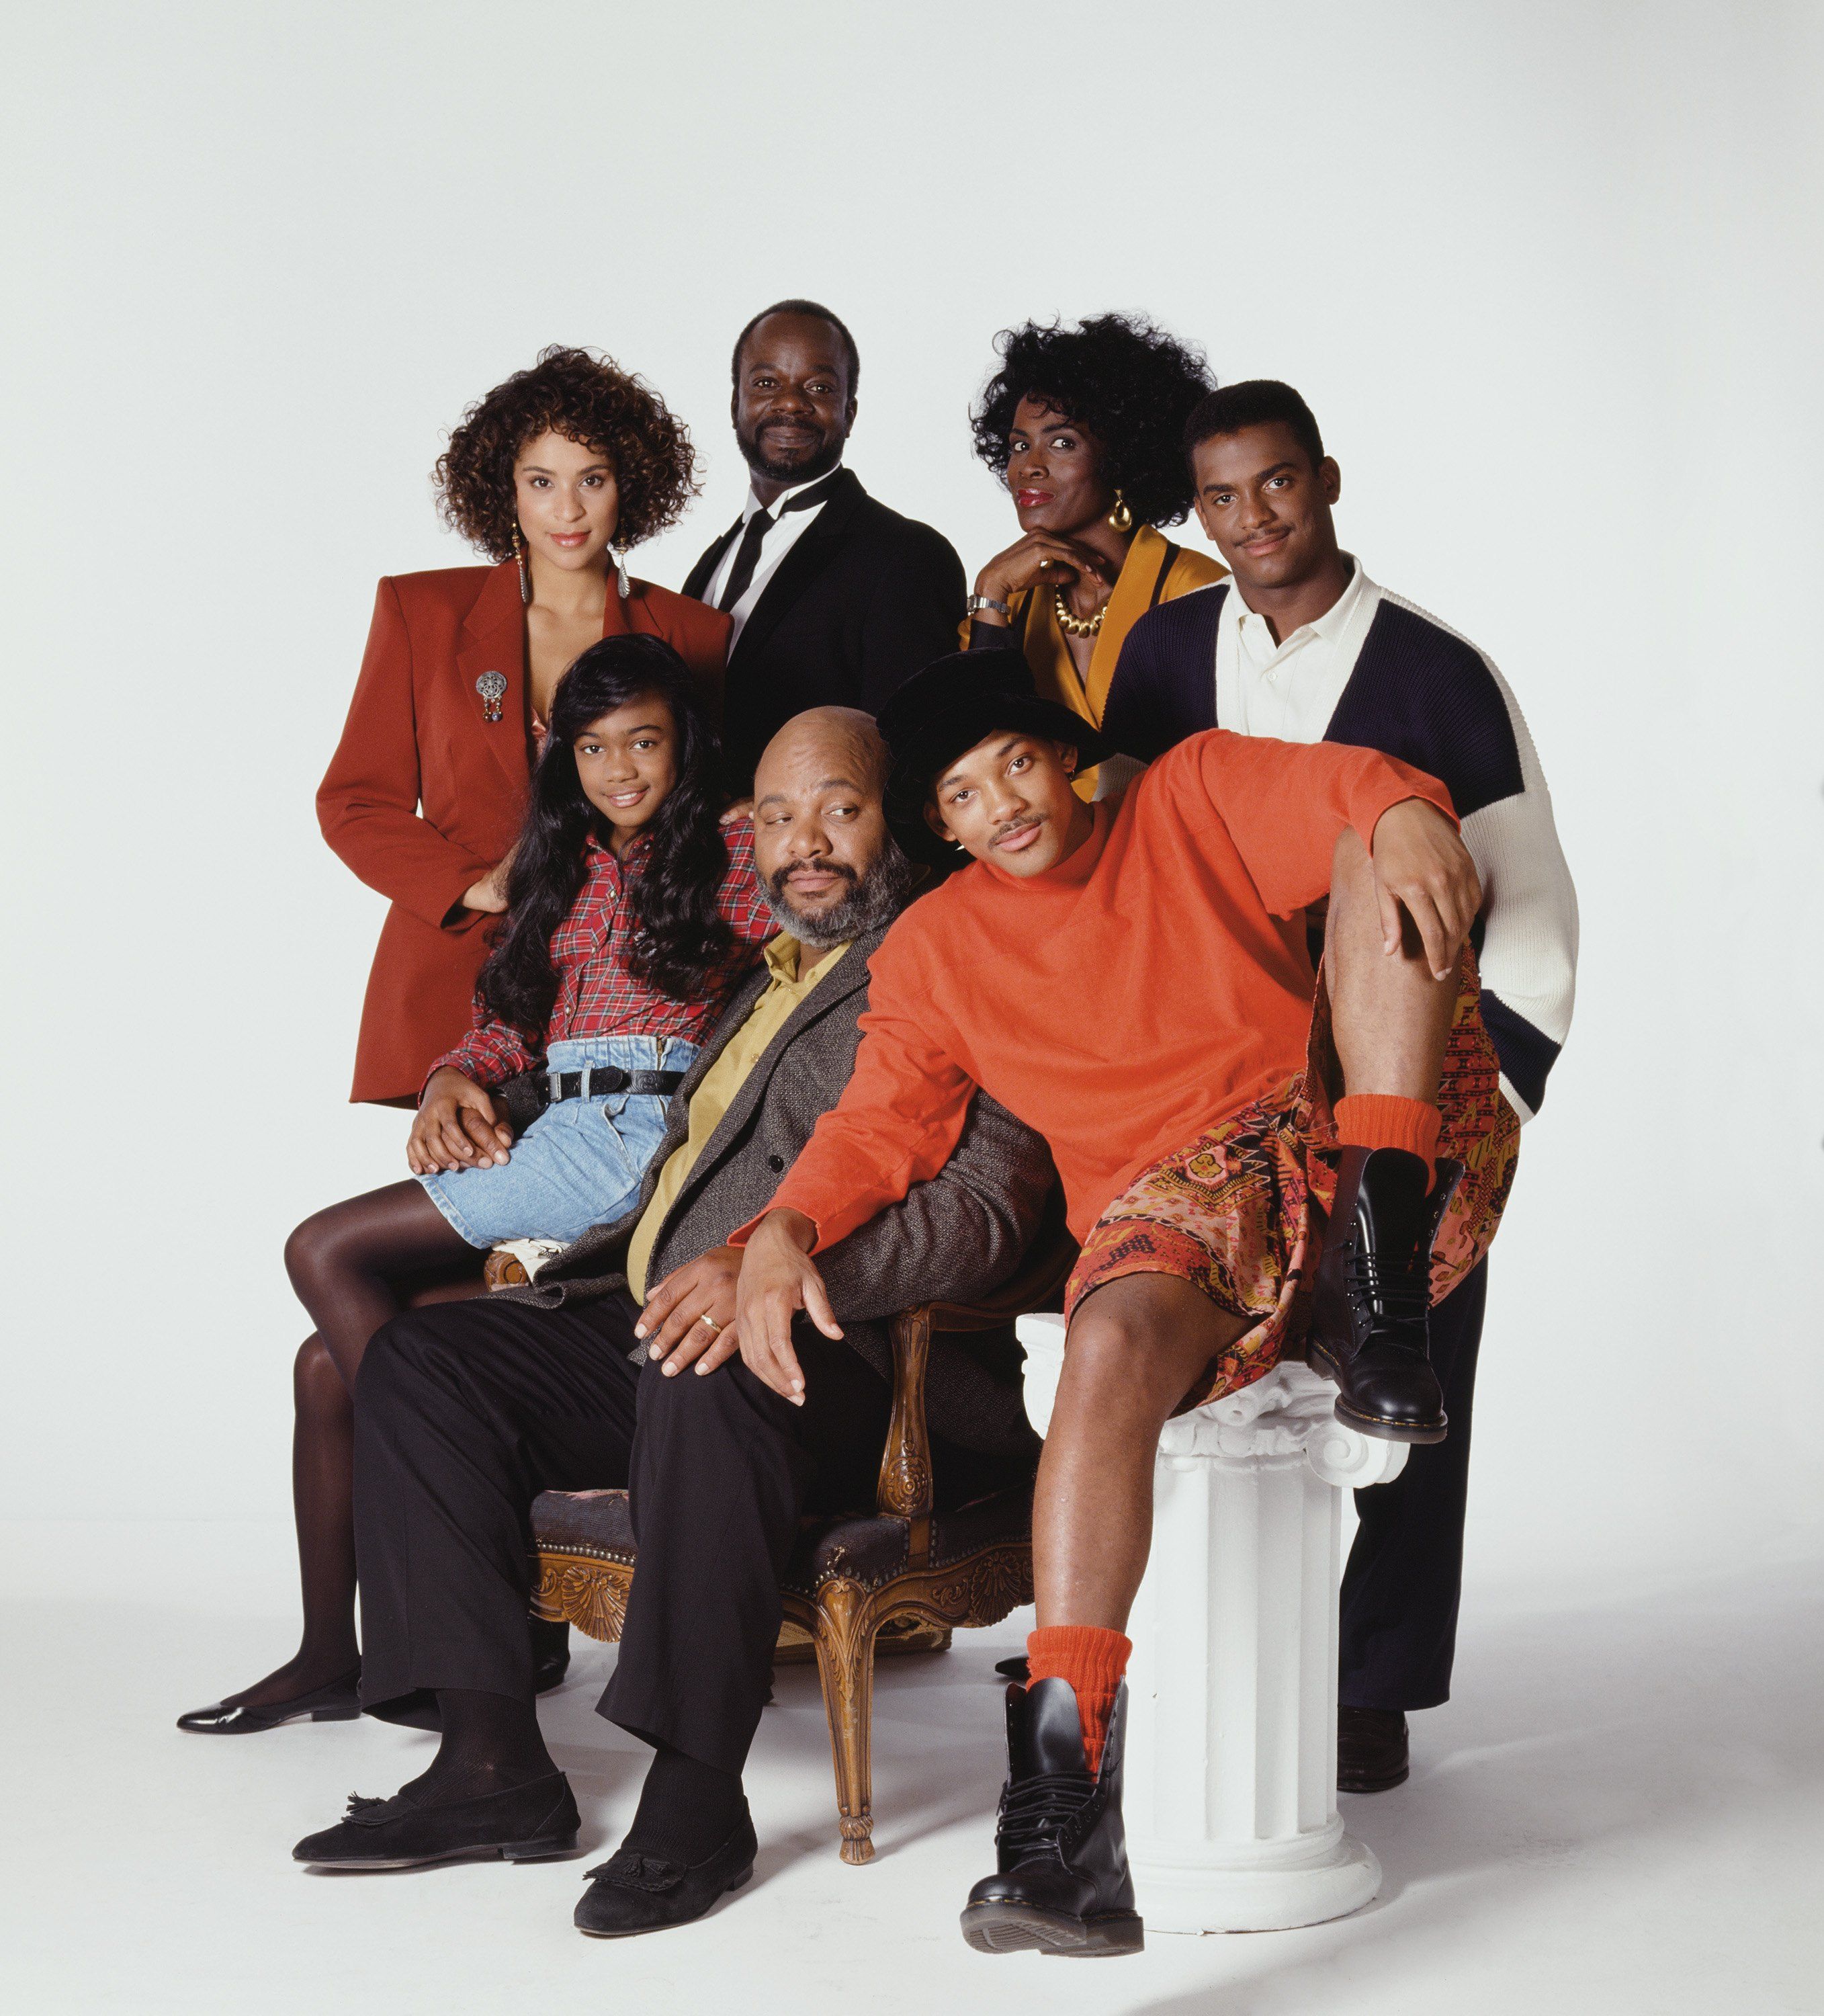 all fresh prince of bel air episodes download in 1